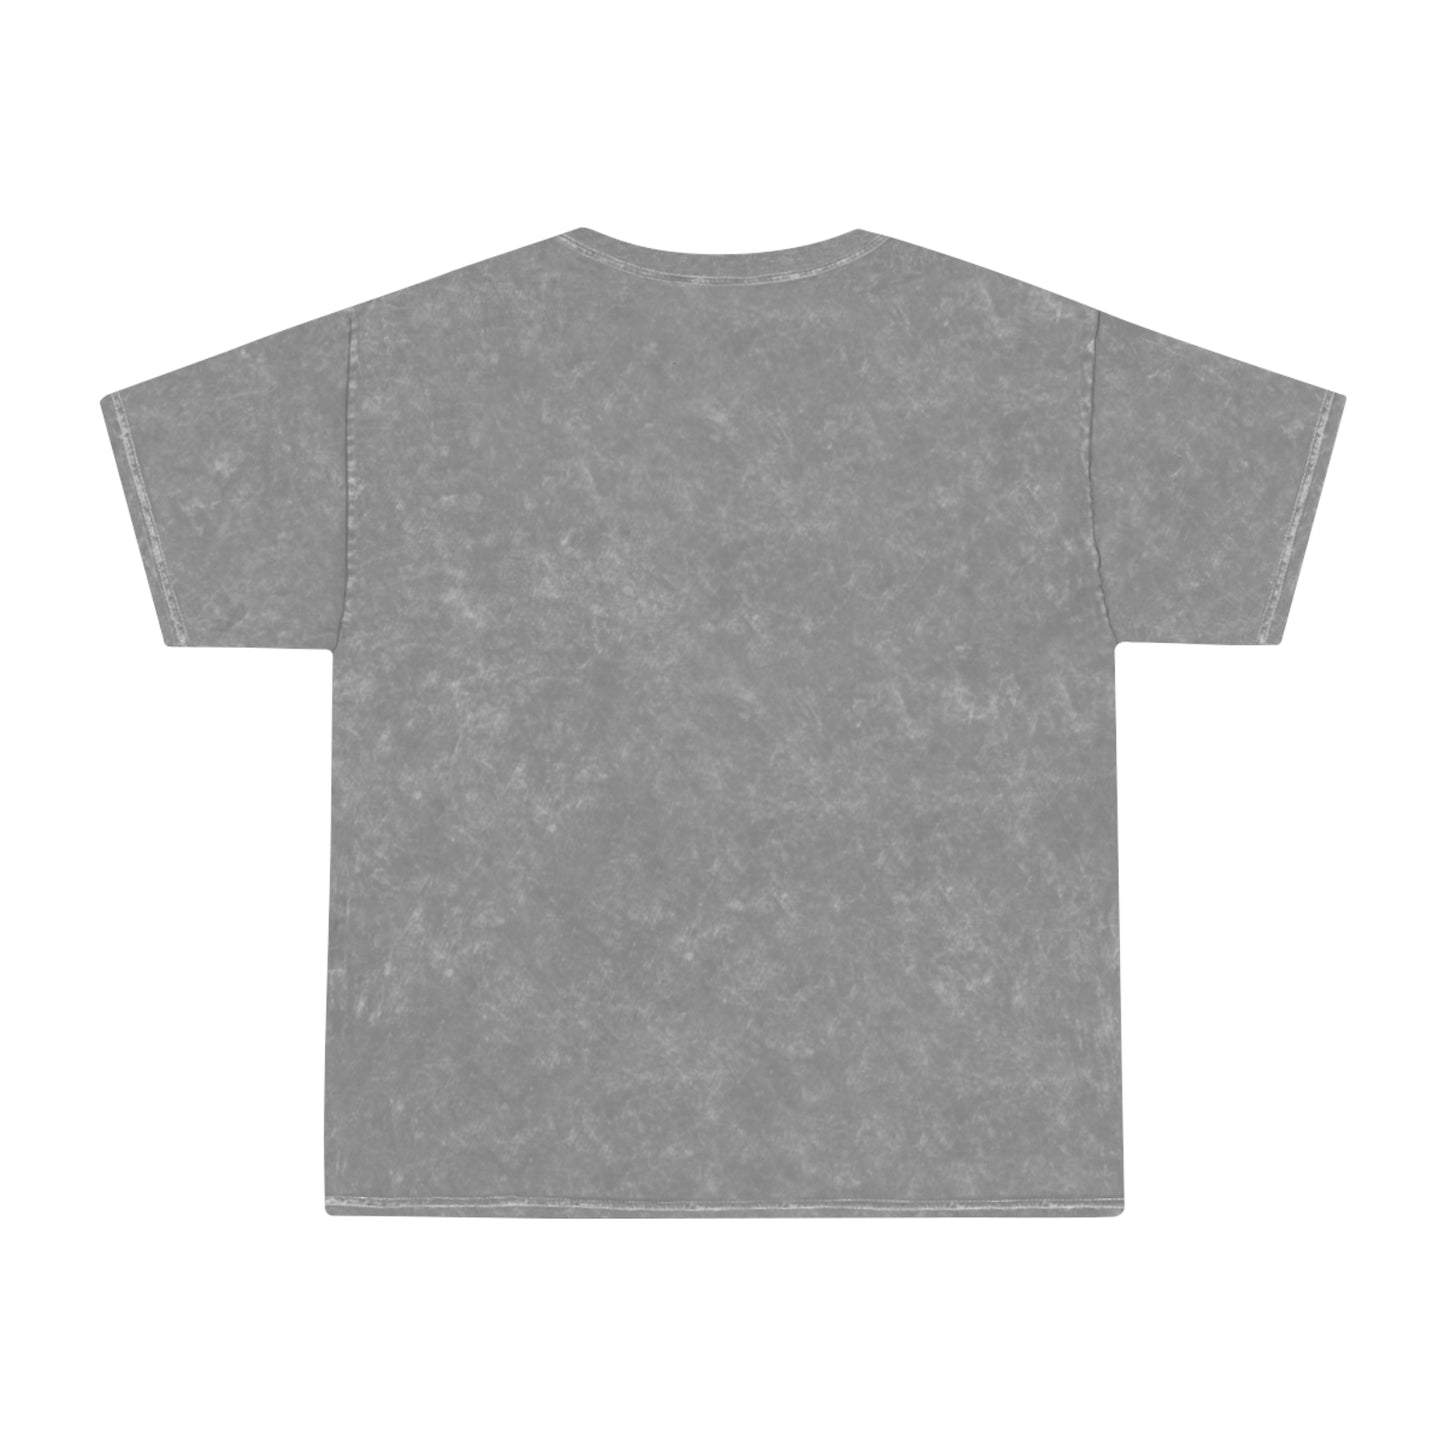 Justice Bus Unisex Mineral Wash T-Shirt